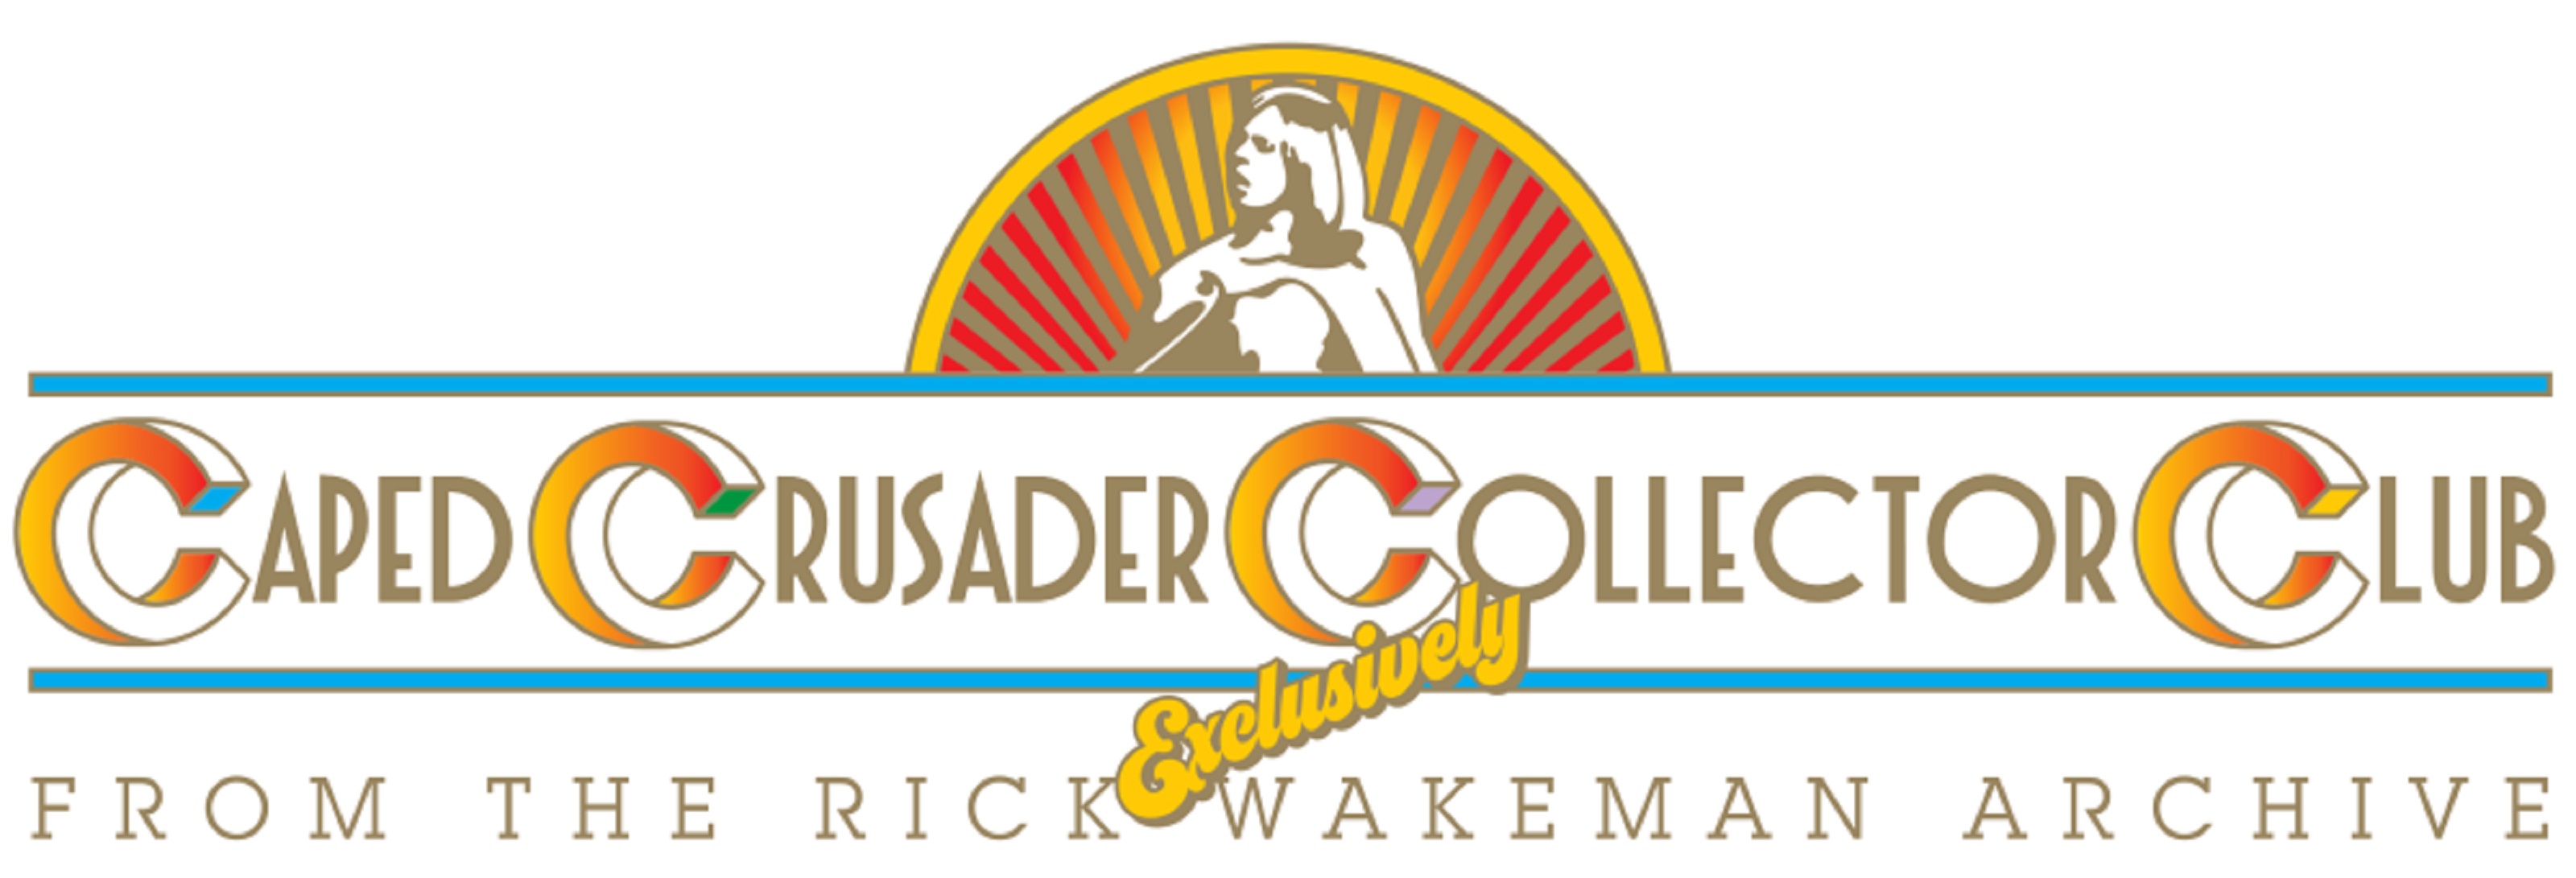 Join Keyboard Legend Rick Wakeman’s Caped Crusader Collector Club